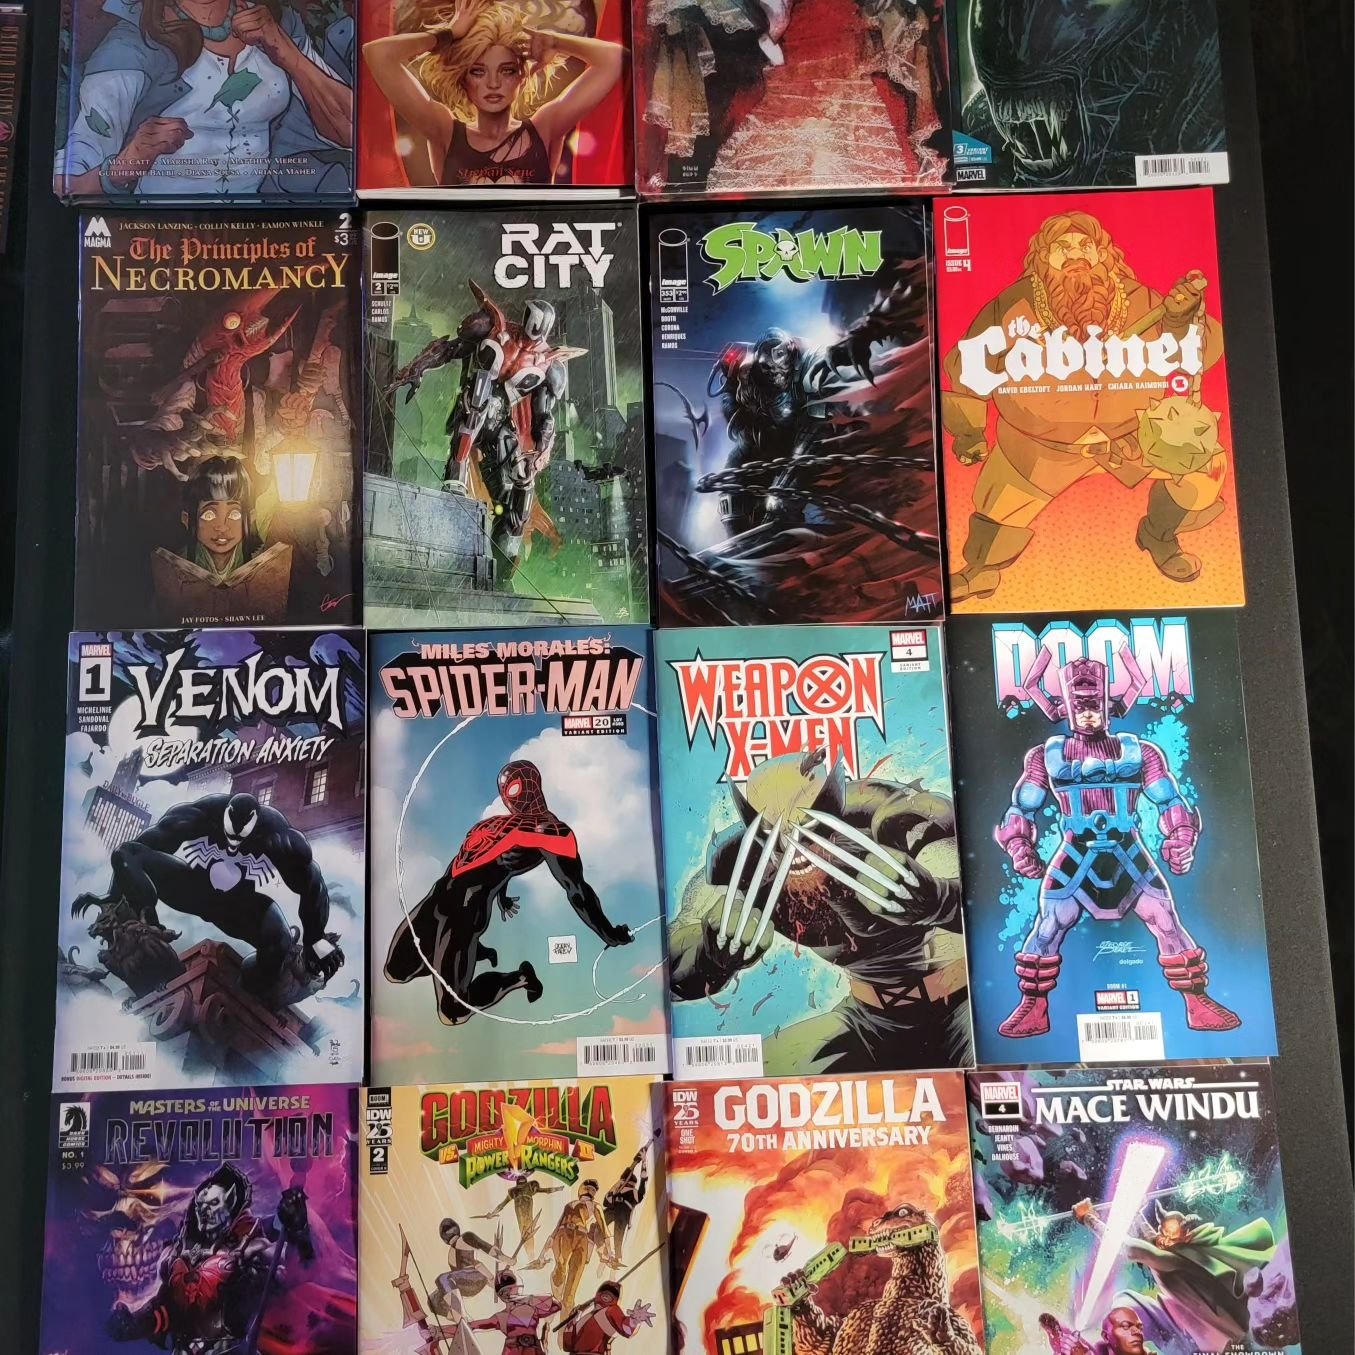 Beauregard Lionette gets the Mighty Nein Origins treatment!  Plus the complete Dracula from James Tynion IV, Doom gets his own one shot, Venom suffers from Separation Anxiety, Masters of the Universe begins a new series, and so much more!